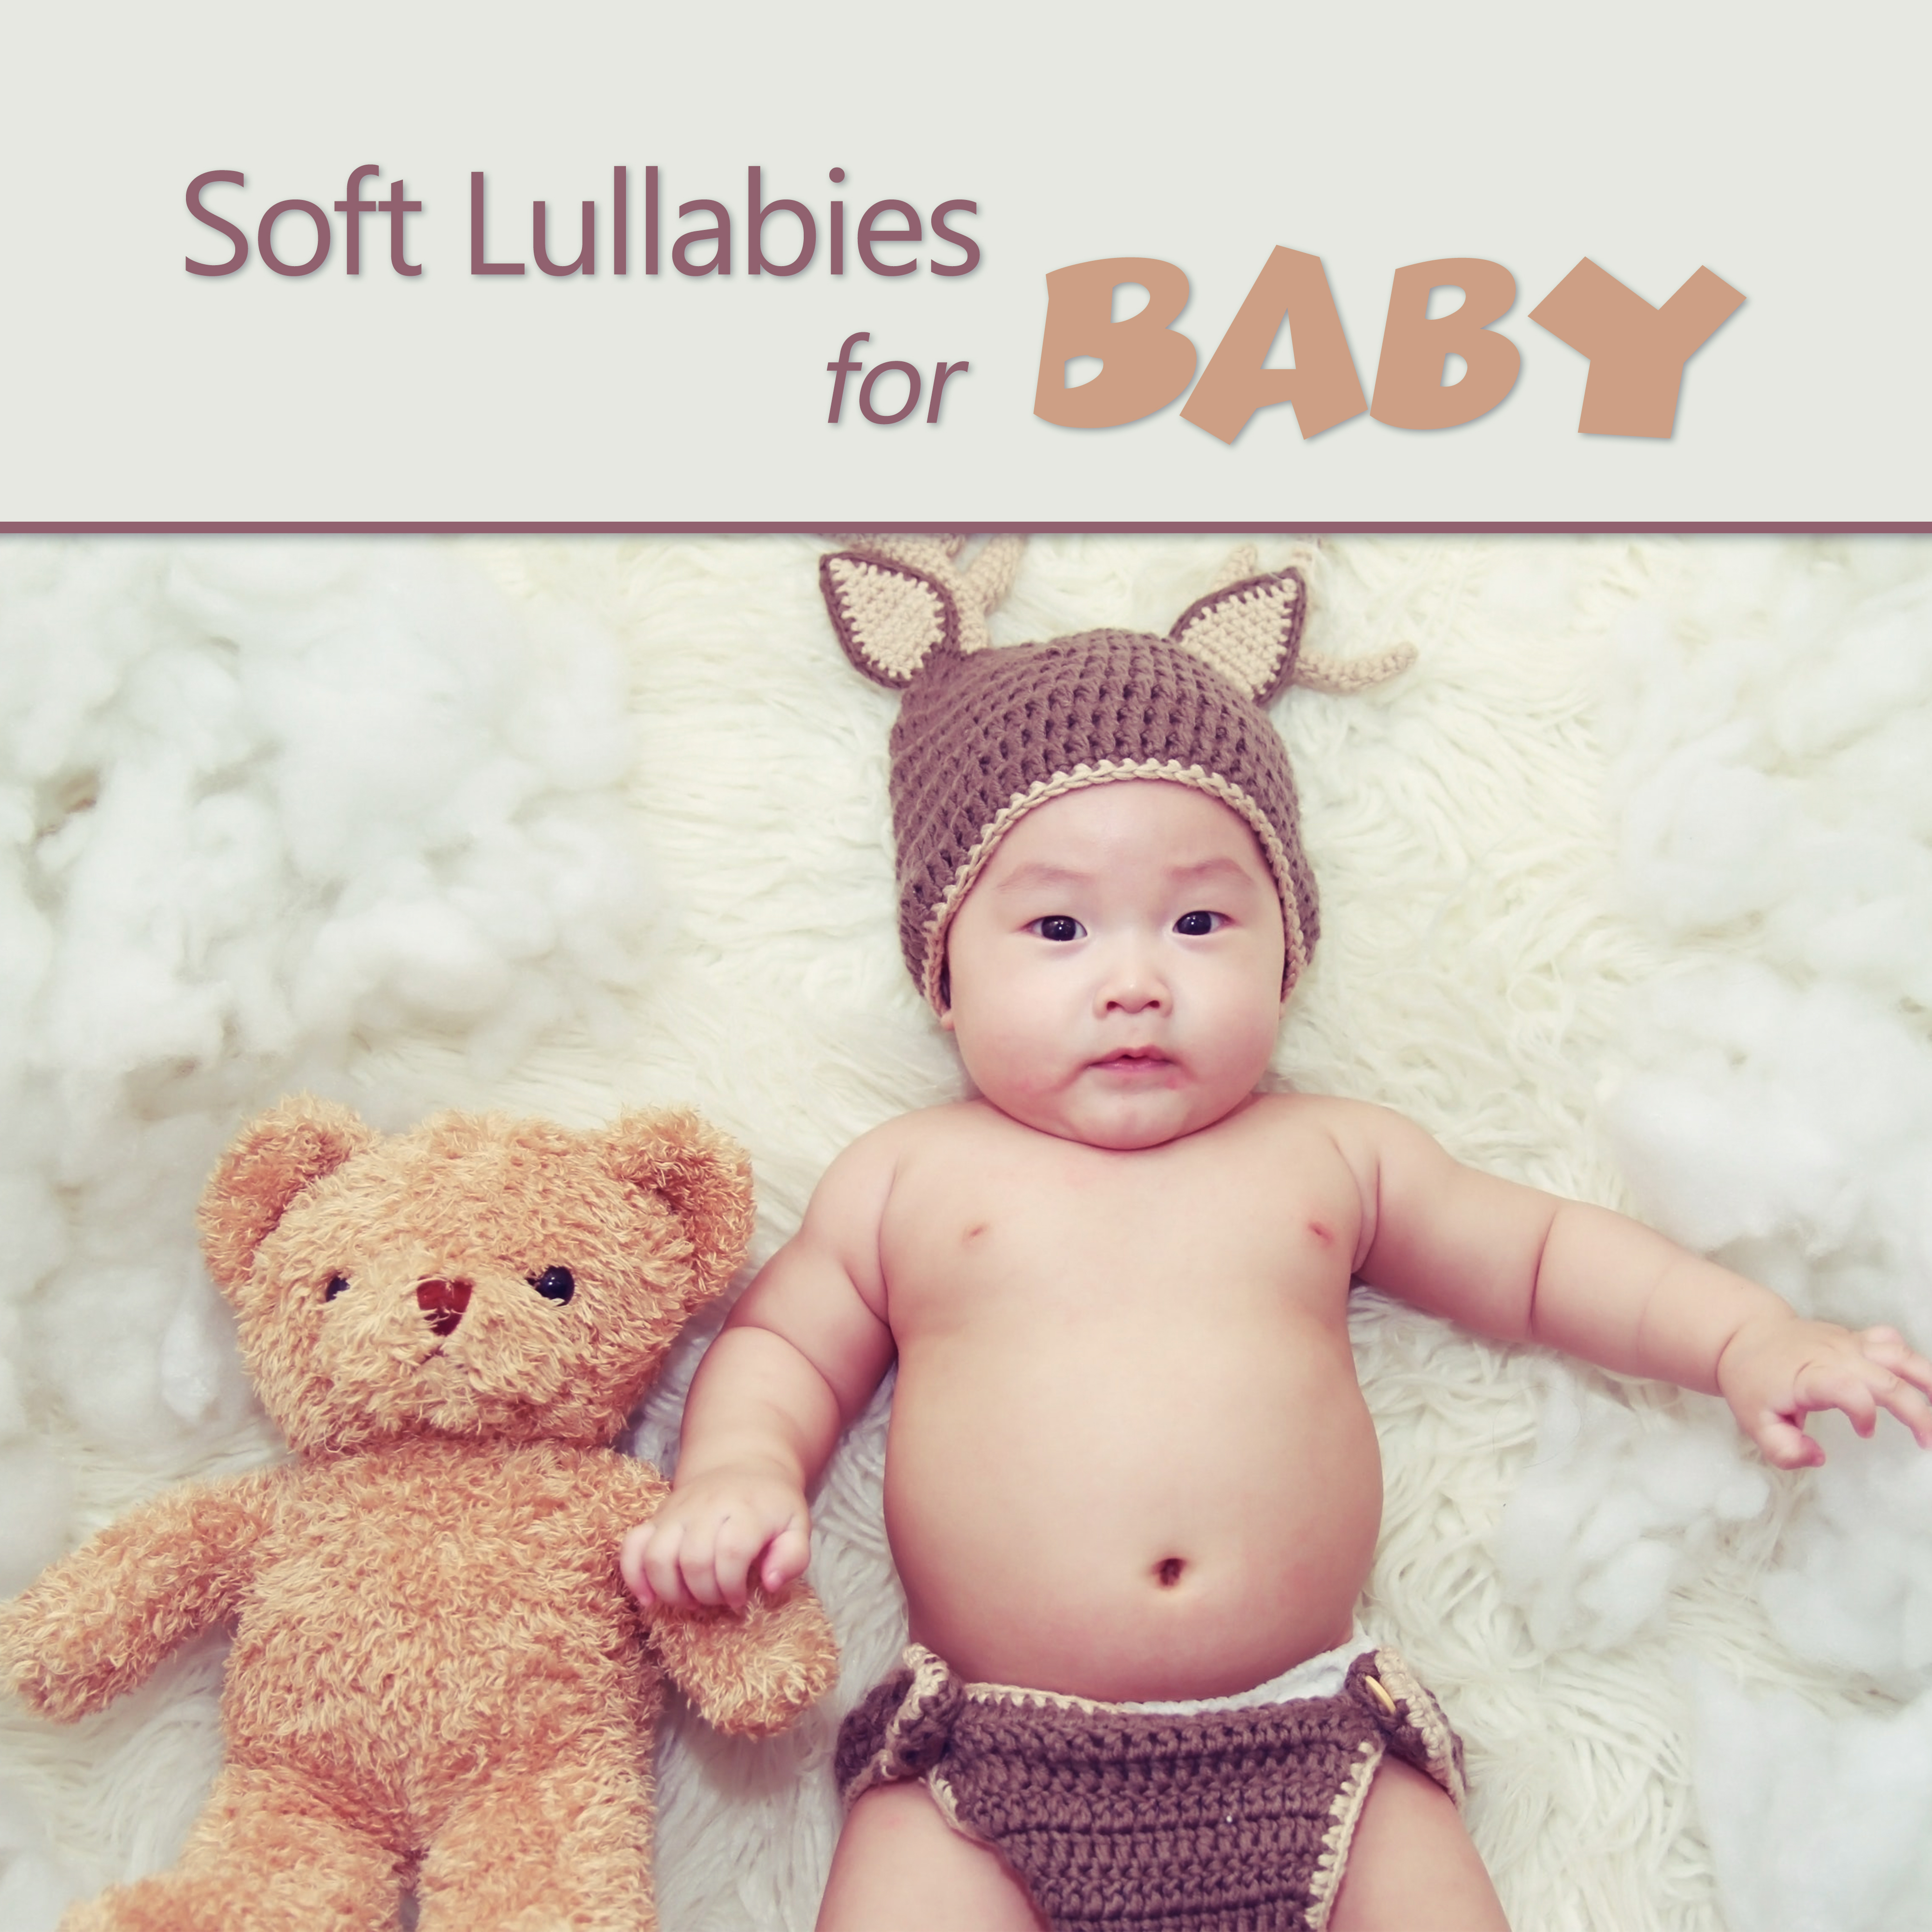 Soft Lullabies for Baby